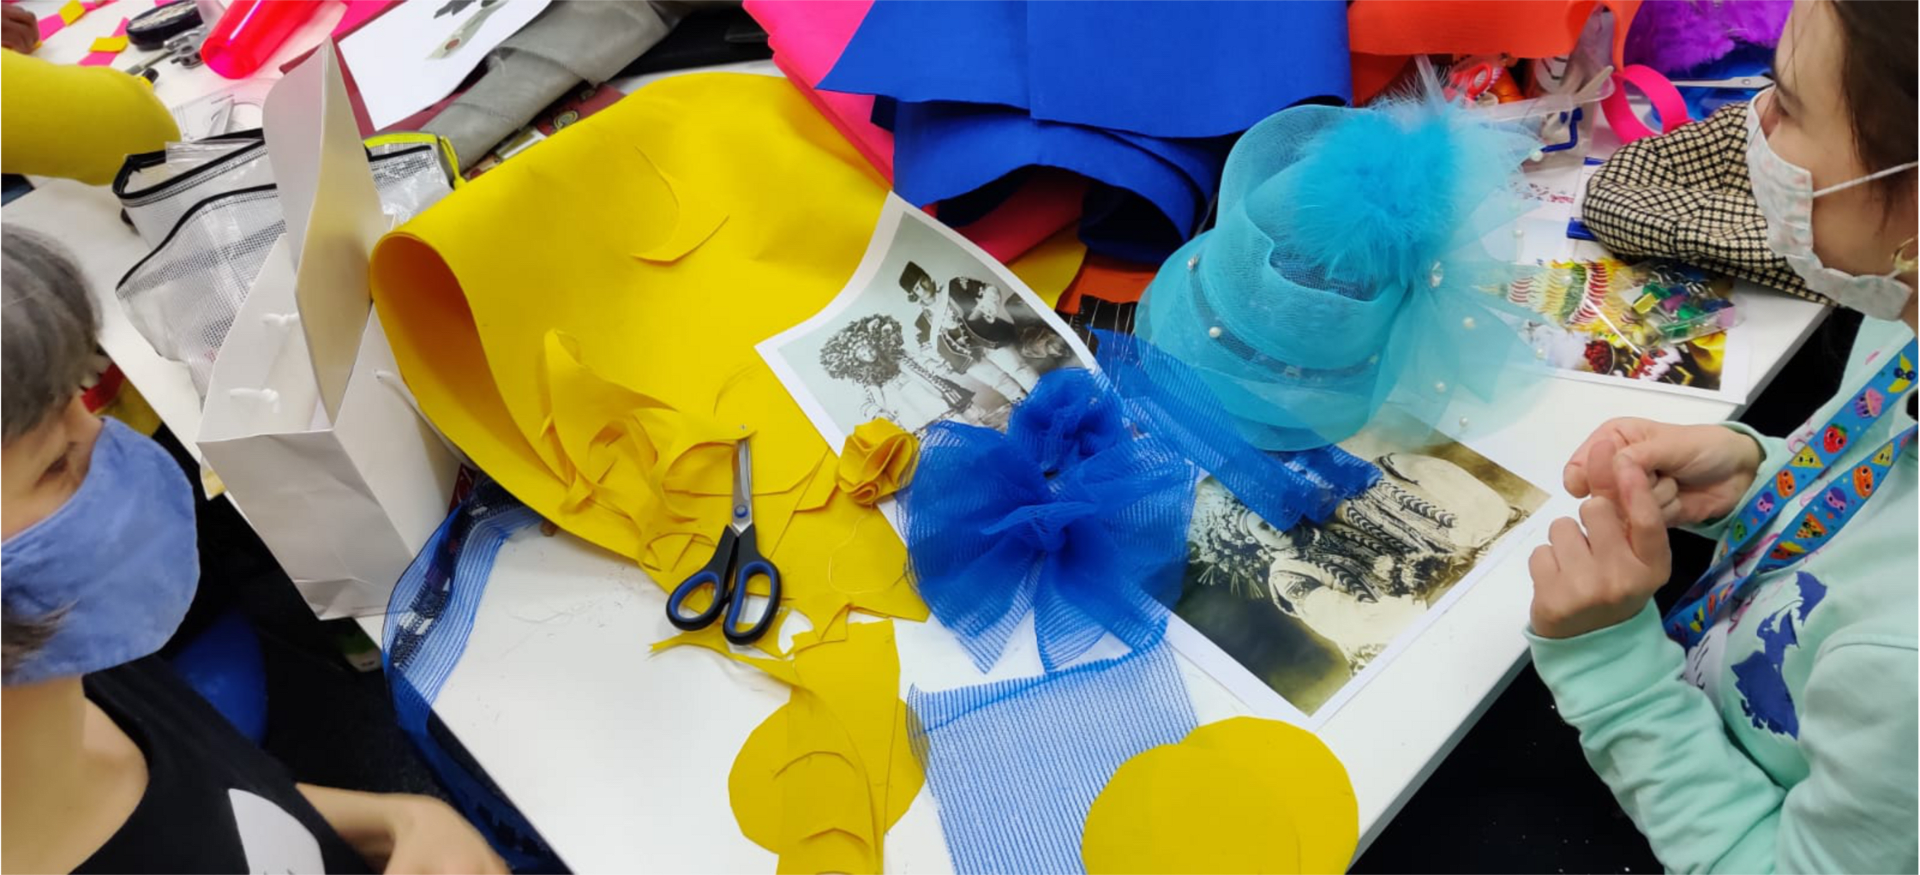 Kelly and Jen take inspiration from old fashioned images of Ukrainian headdresses to decorate a hat with blue and yellow flowers